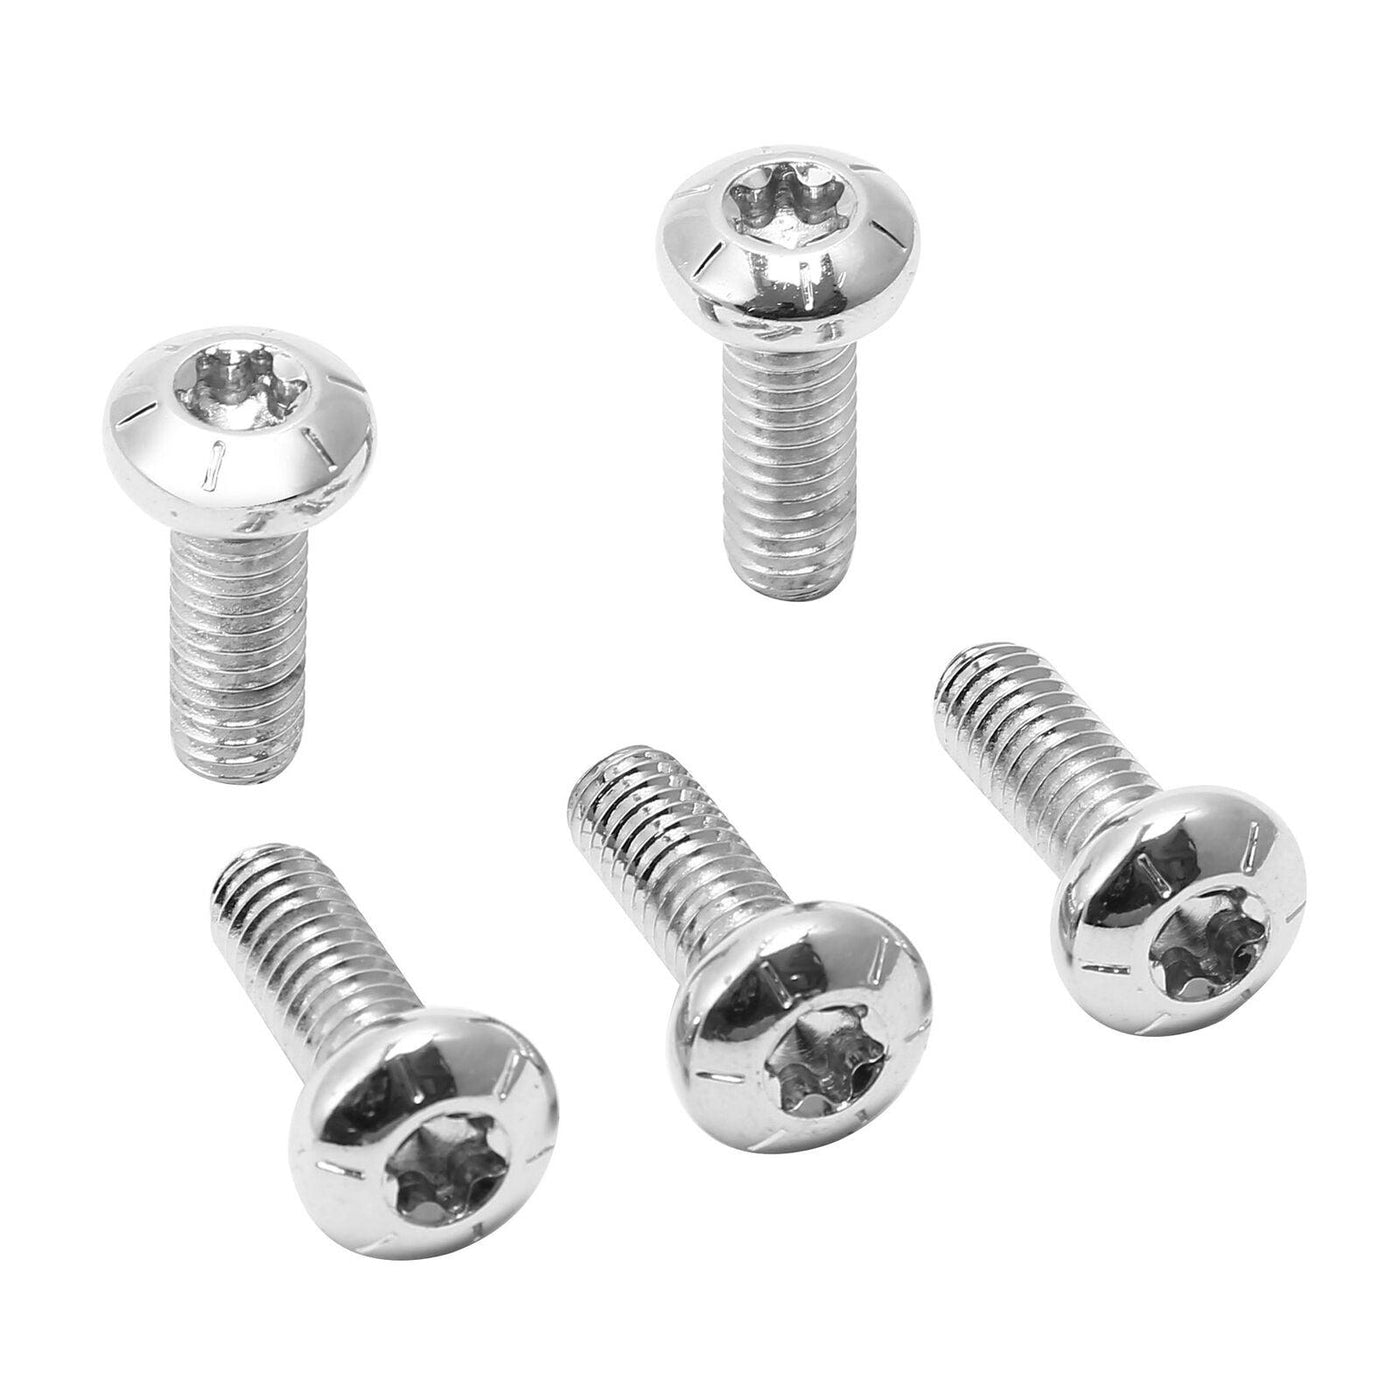 5x Front Disk Brake Rotor Bolts Fit For Harley Davidson Softail Dyna Touring - Moto Life Products